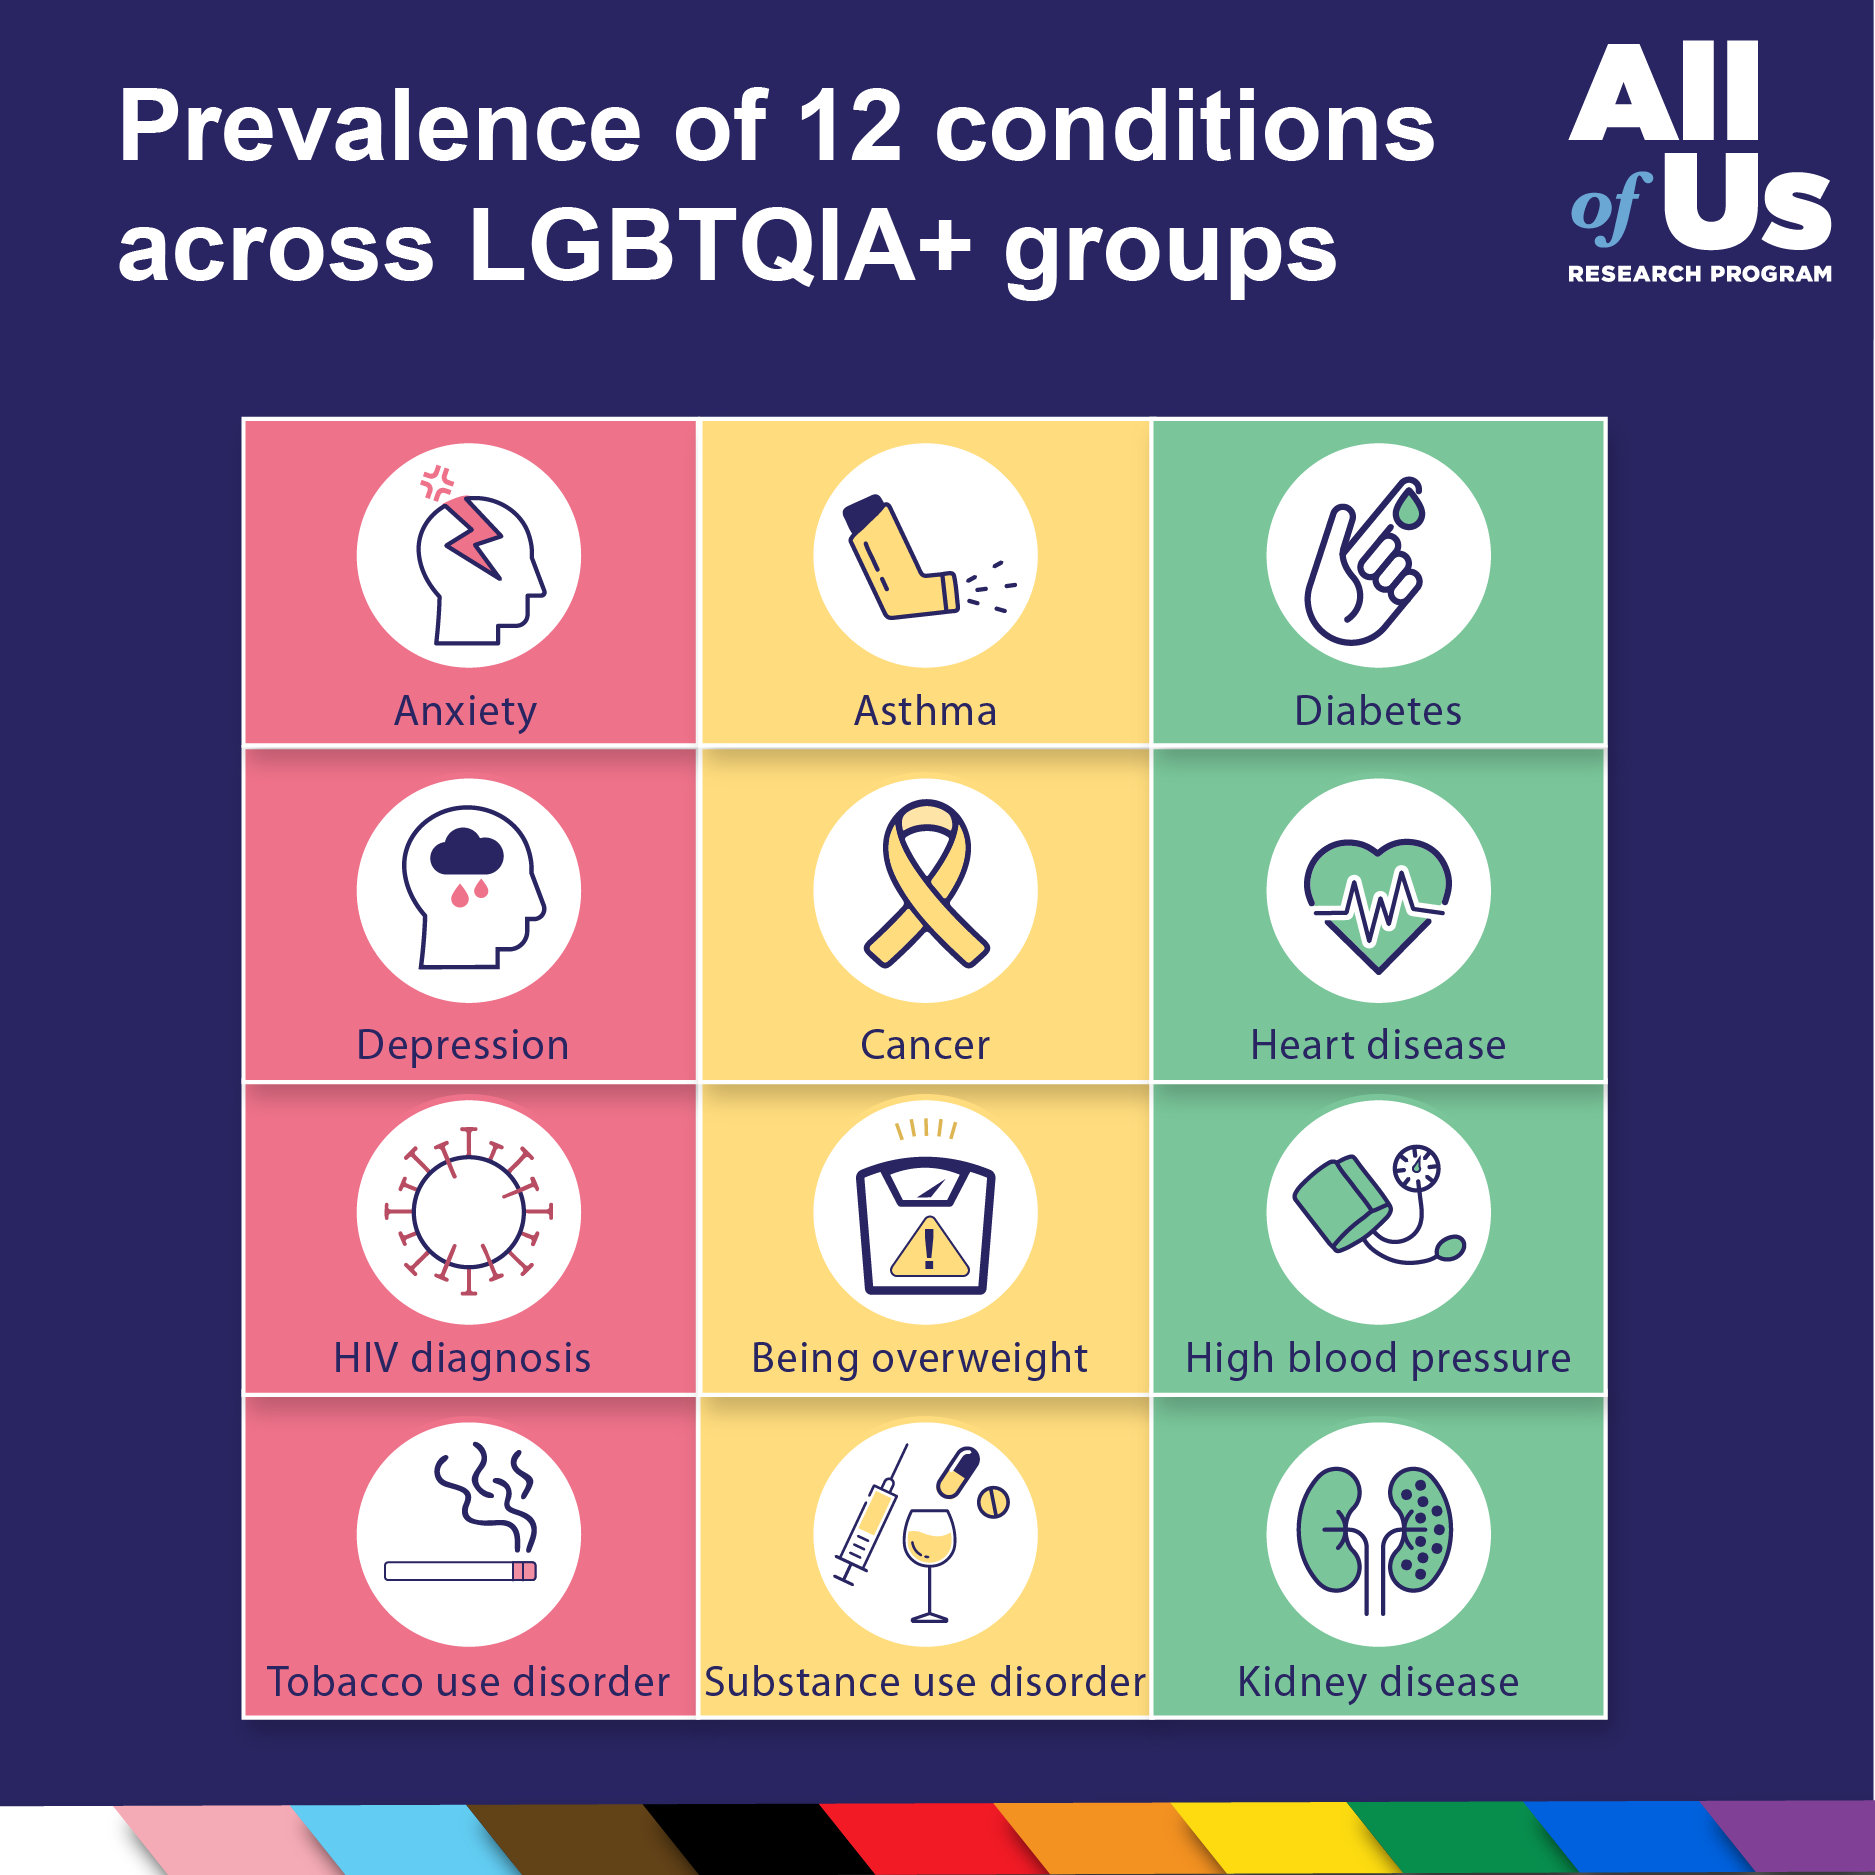 An infographic titled “Prevalence of 12 conditions across LGBTQIA+ groups” with the logo of the All of Us Research Program. The 12 conditions include anxiety, depression, HIV diagnosis, tobacco use disorder, asthma, cancer, being overweight, substance abuse disorder, diabetes, heart disease, high blood pressure, and kidney disease.